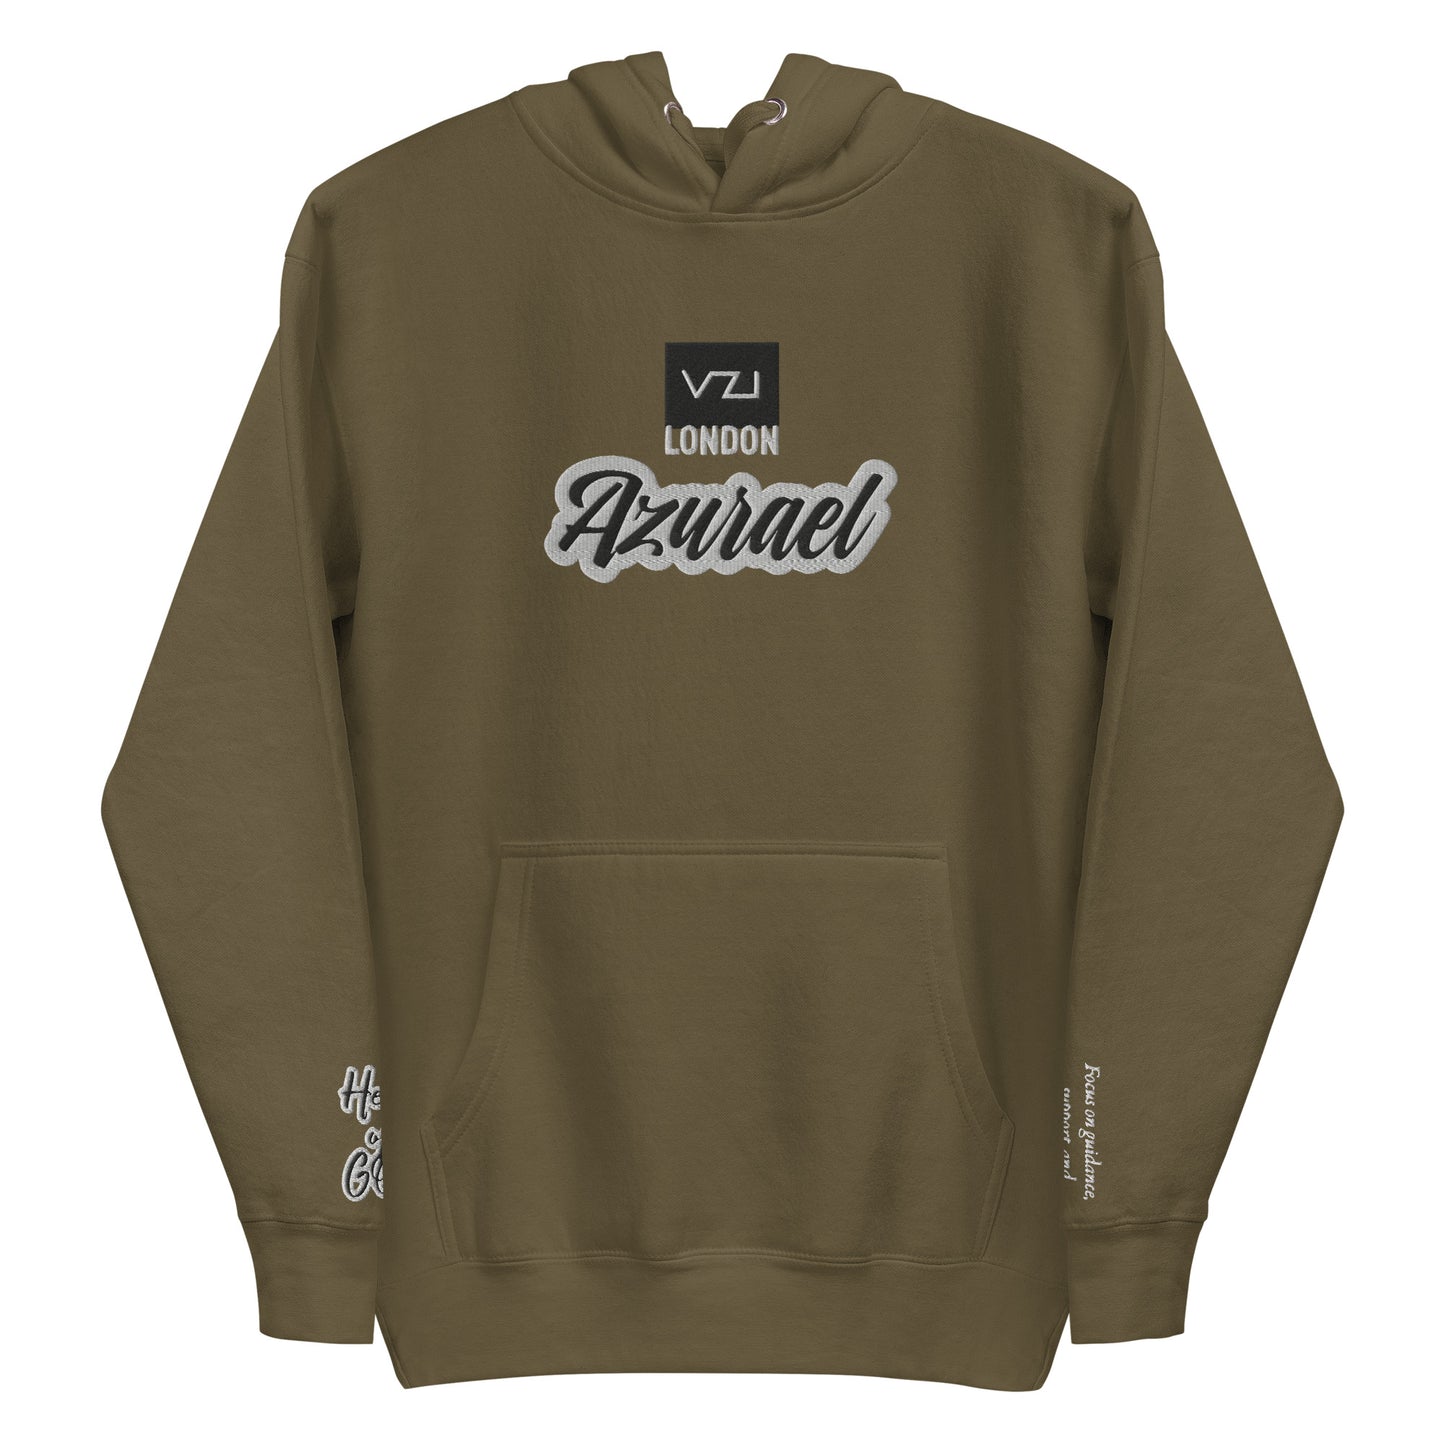 Azurael: Men's Hoodie, Classic Cotton: Focus on guidance, support, and spiritual connection(Help of God)